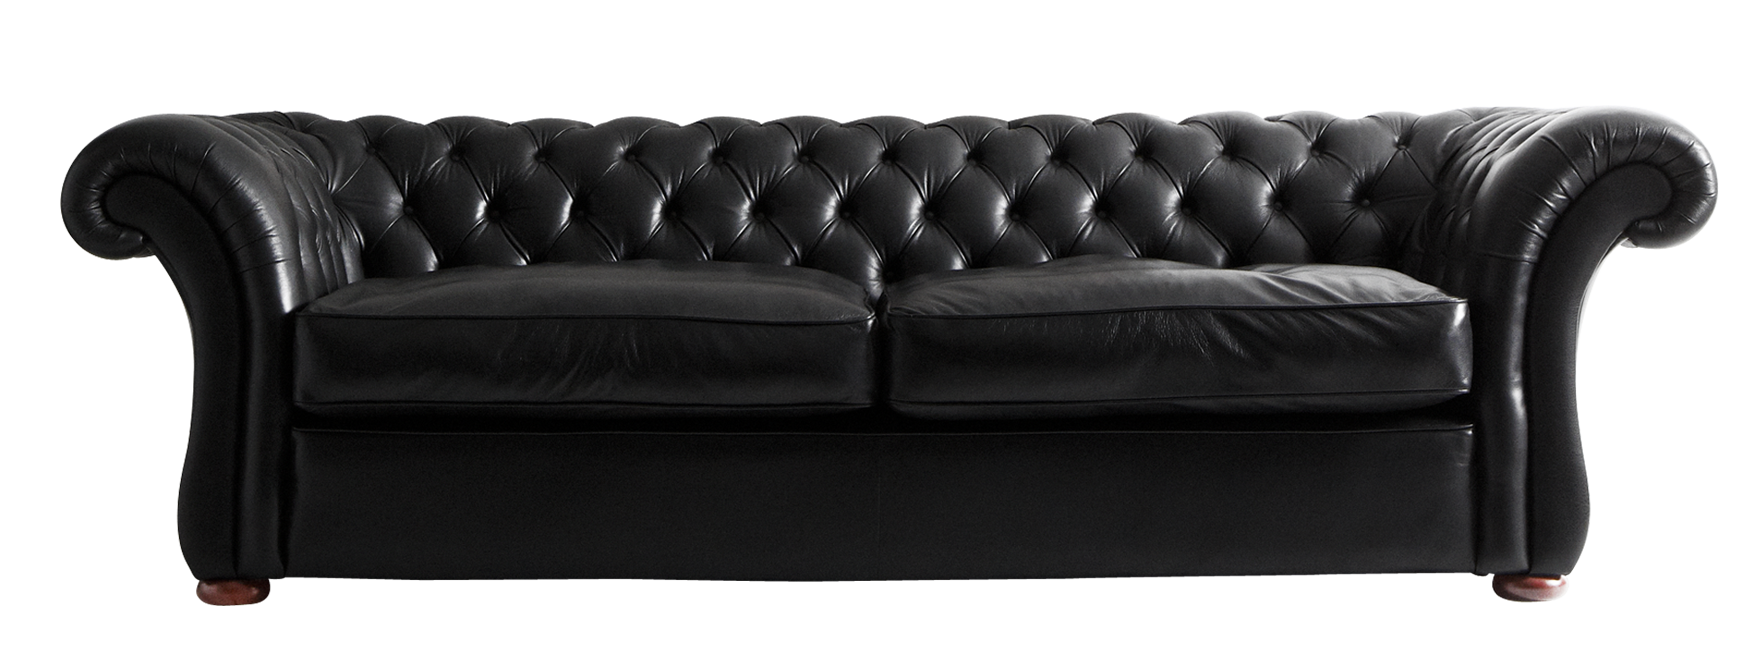 Sofa Background PNG Image